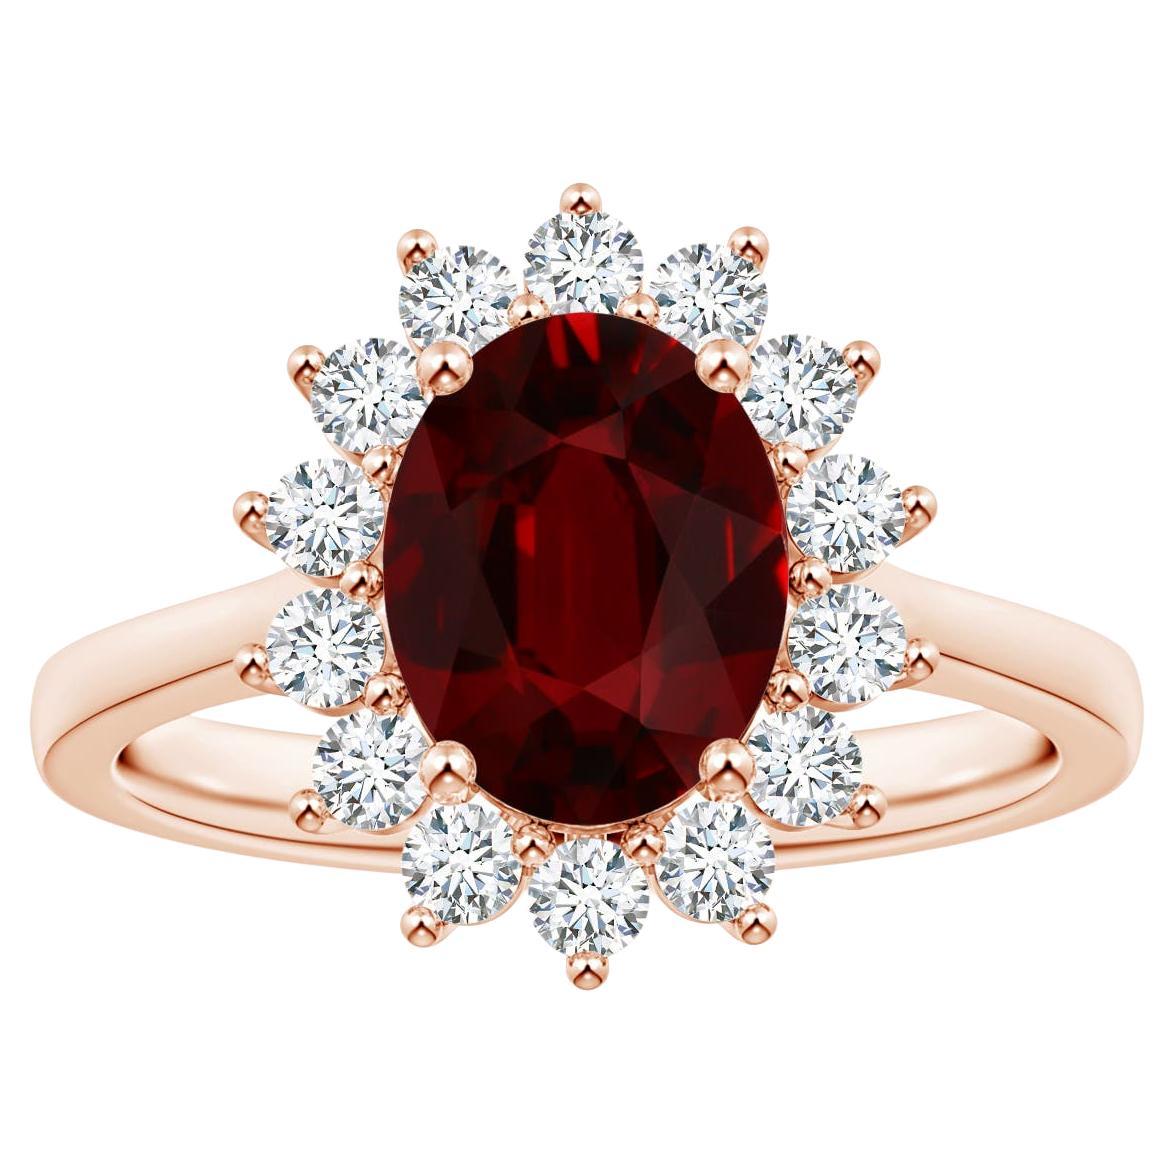 For Sale:  ANGARA Princess Diana Inspired GIA Certified Ruby Halo Ring in Rose Gold